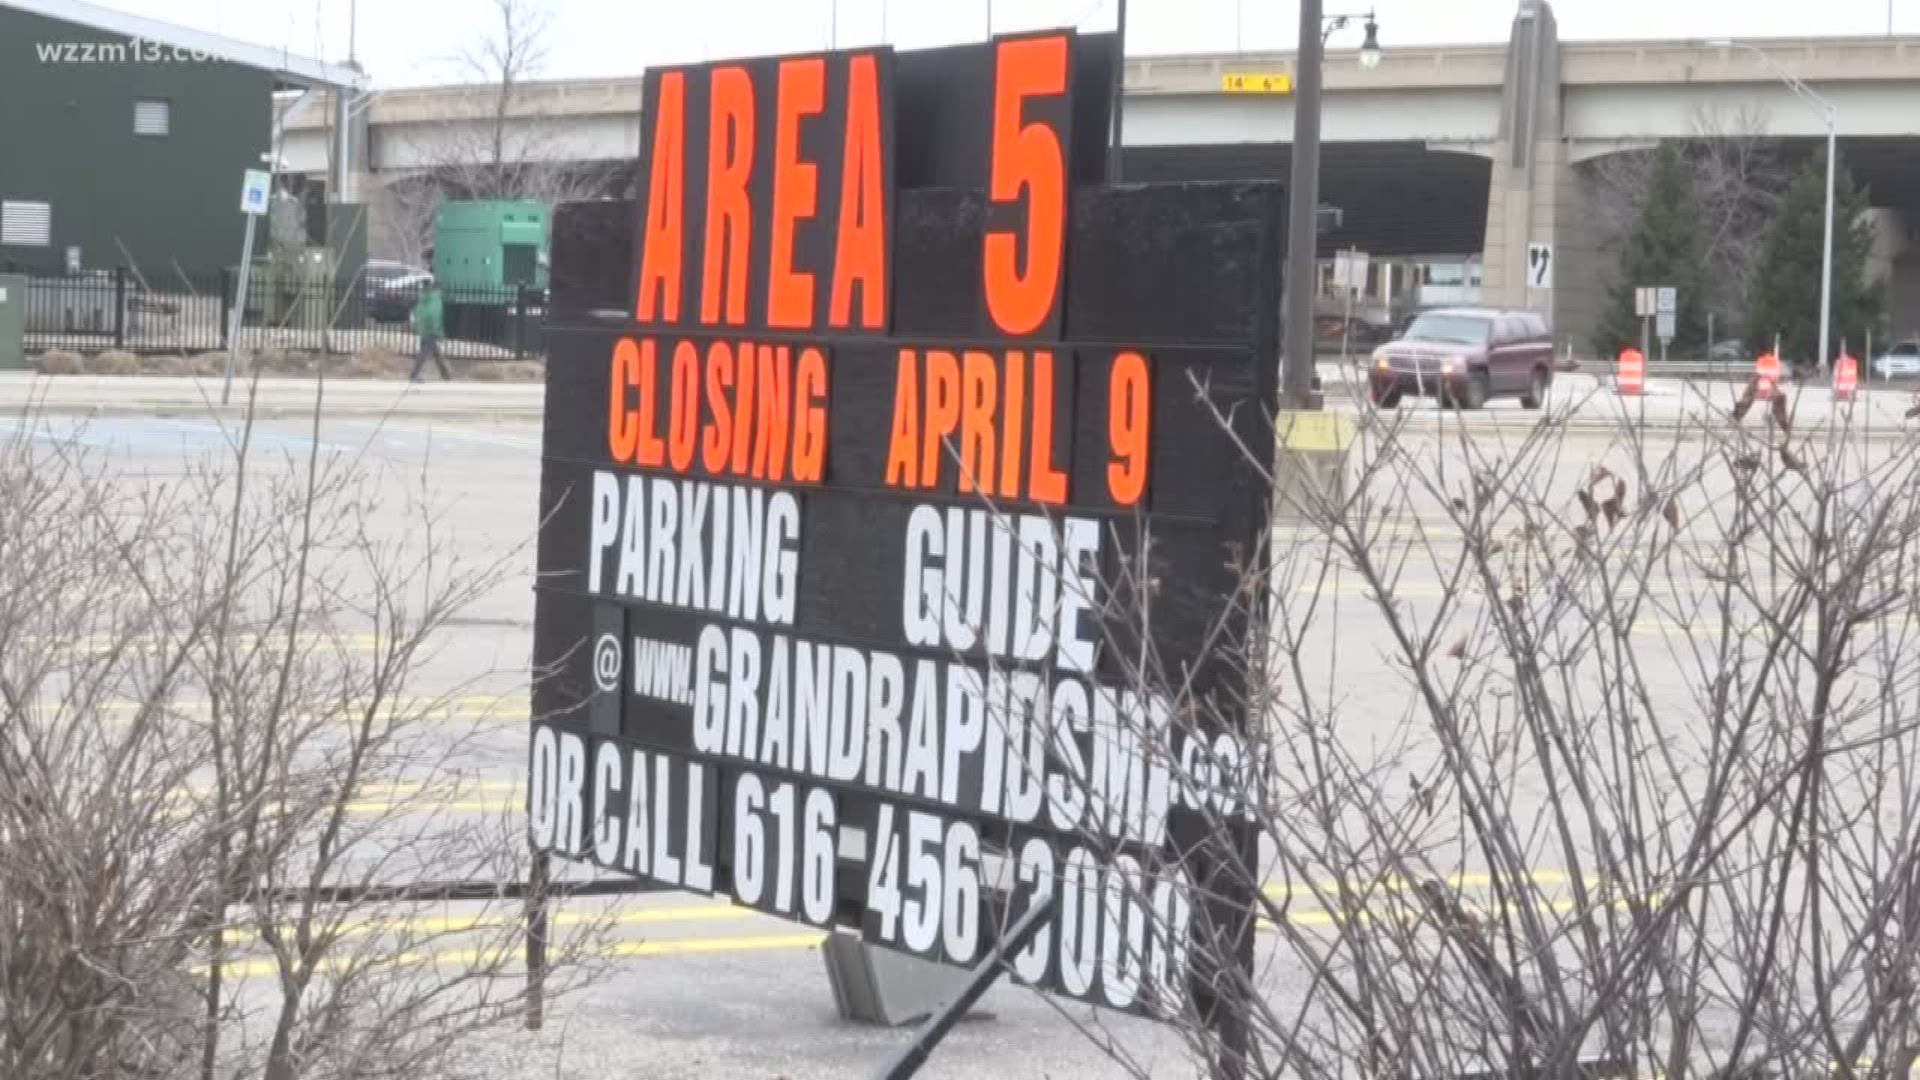 Grand Rapids parking becomes trickier